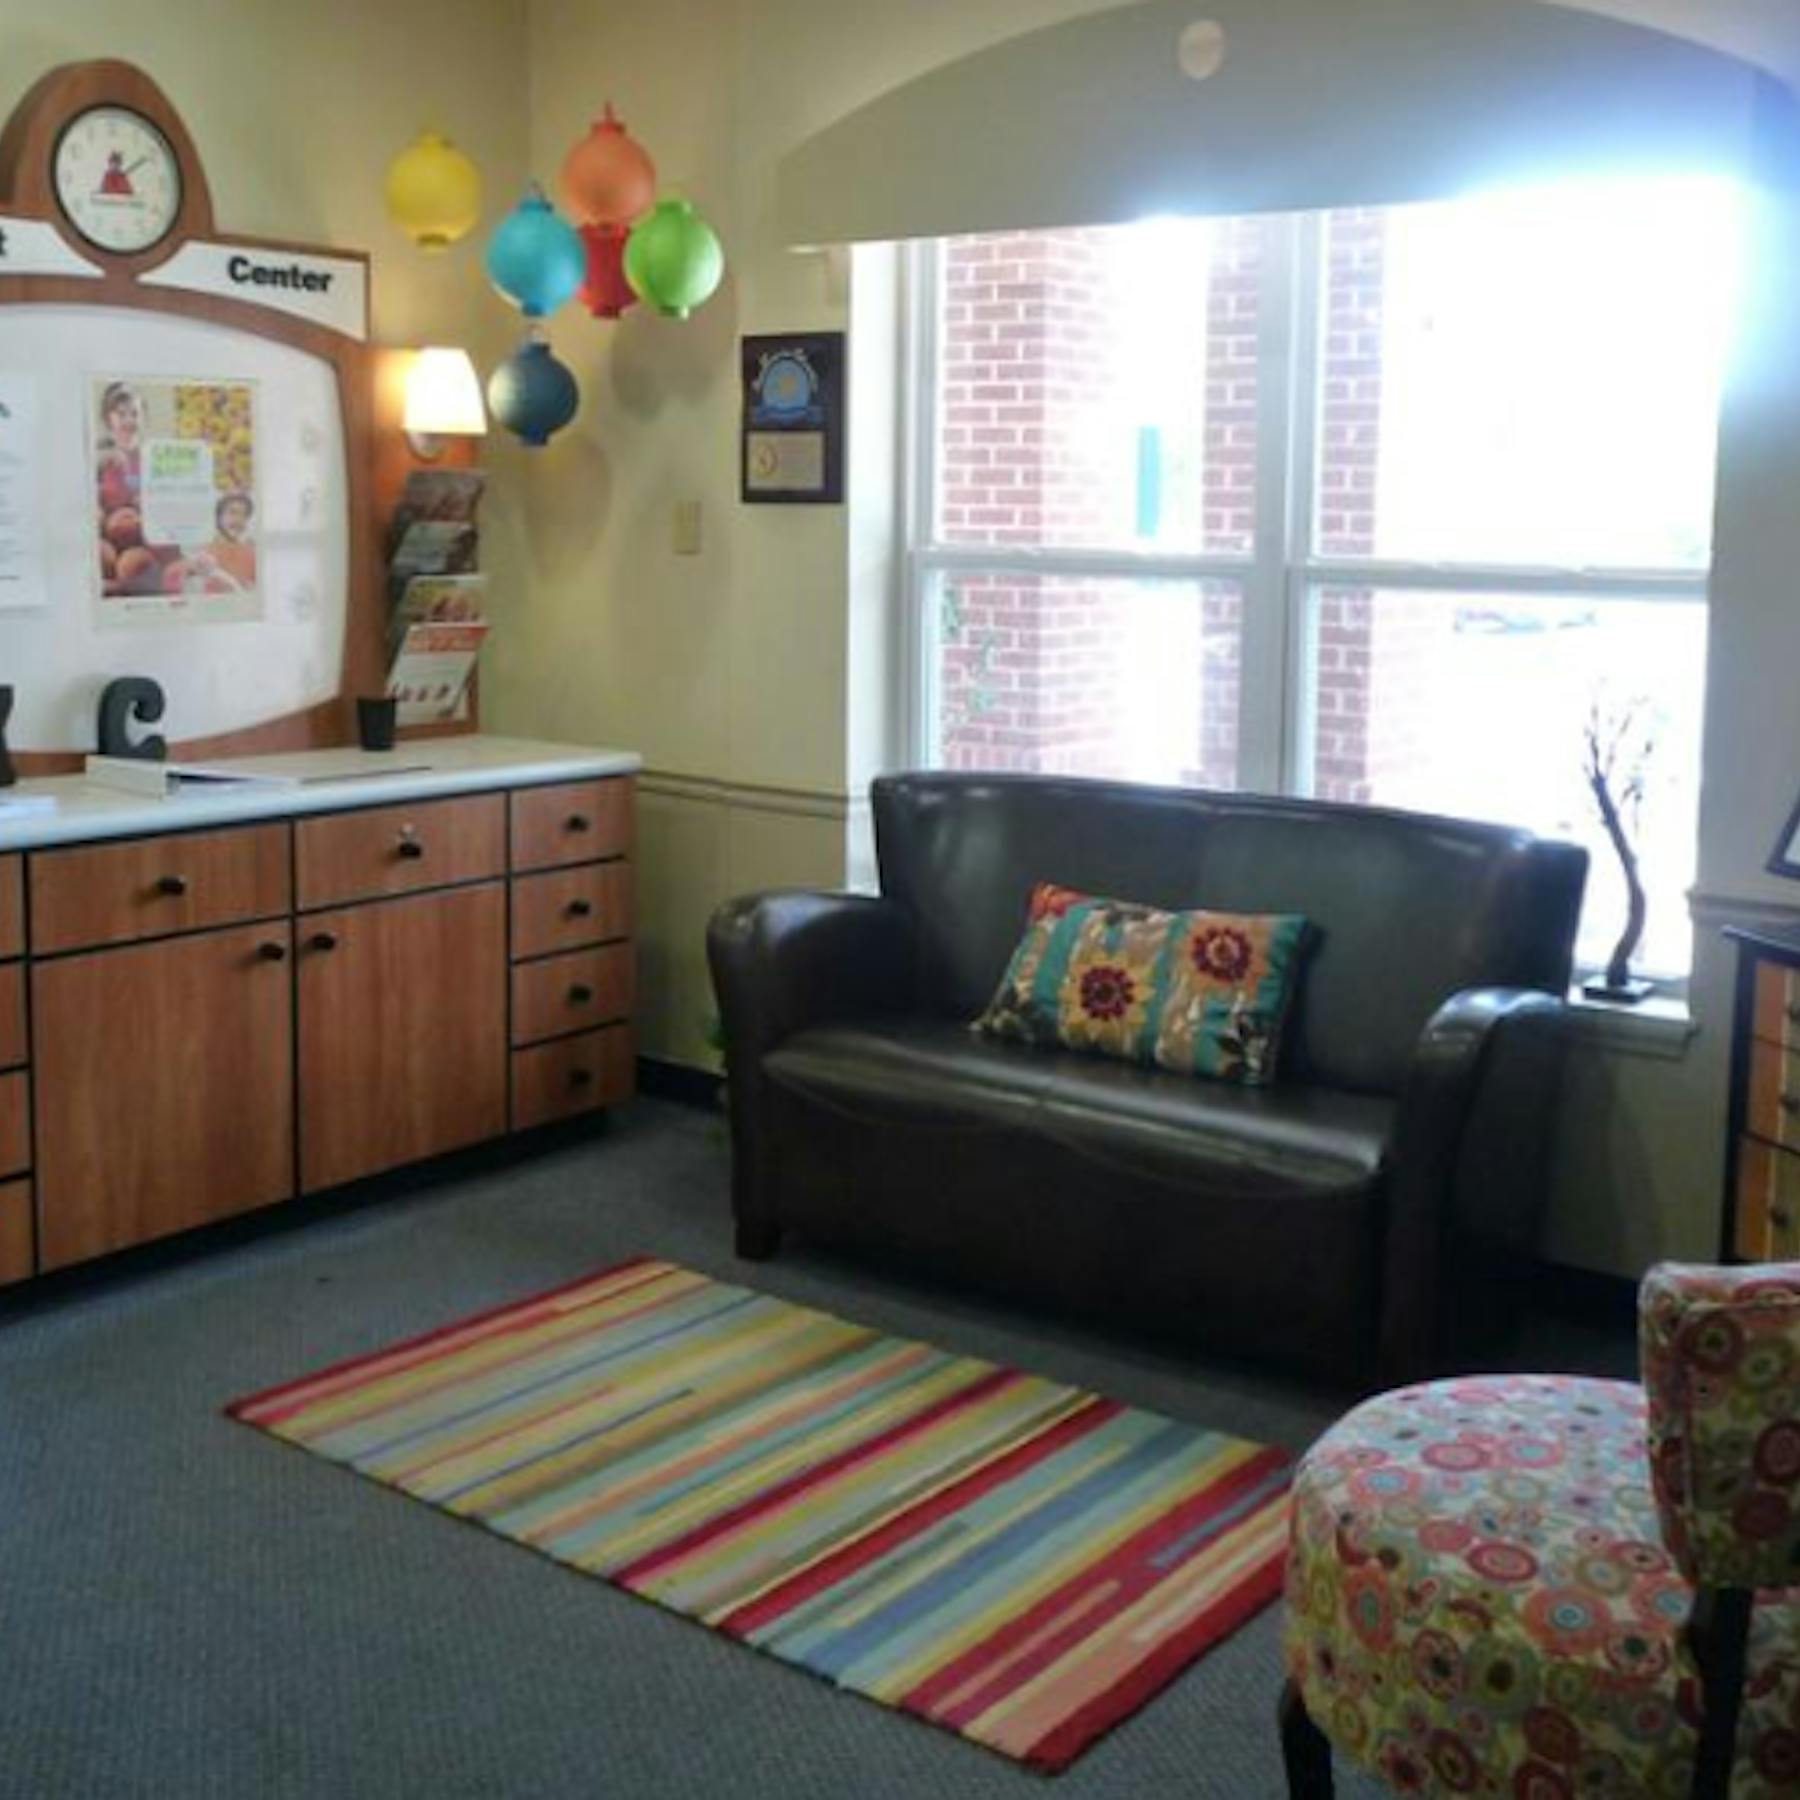 South County KinderCare - Daycare in St. Louis, MO - Winnie